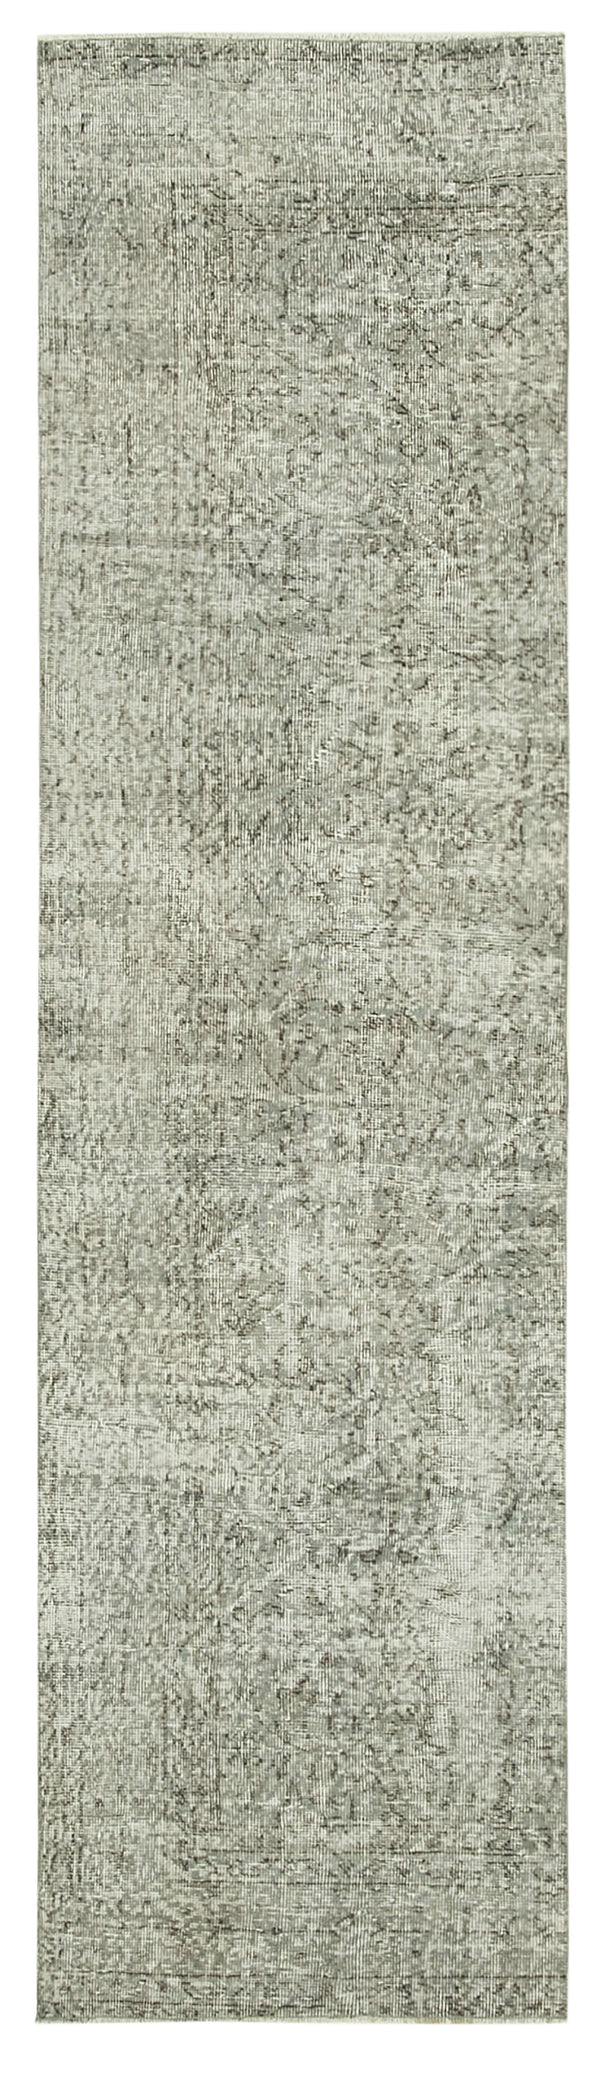 Handmade Overdyed Runner > Design# OL-AC-38197 > Size: 2'-8" x 9'-9", Carpet Culture Rugs, Handmade Rugs, NYC Rugs, New Rugs, Shop Rugs, Rug Store, Outlet Rugs, SoHo Rugs, Rugs in USA